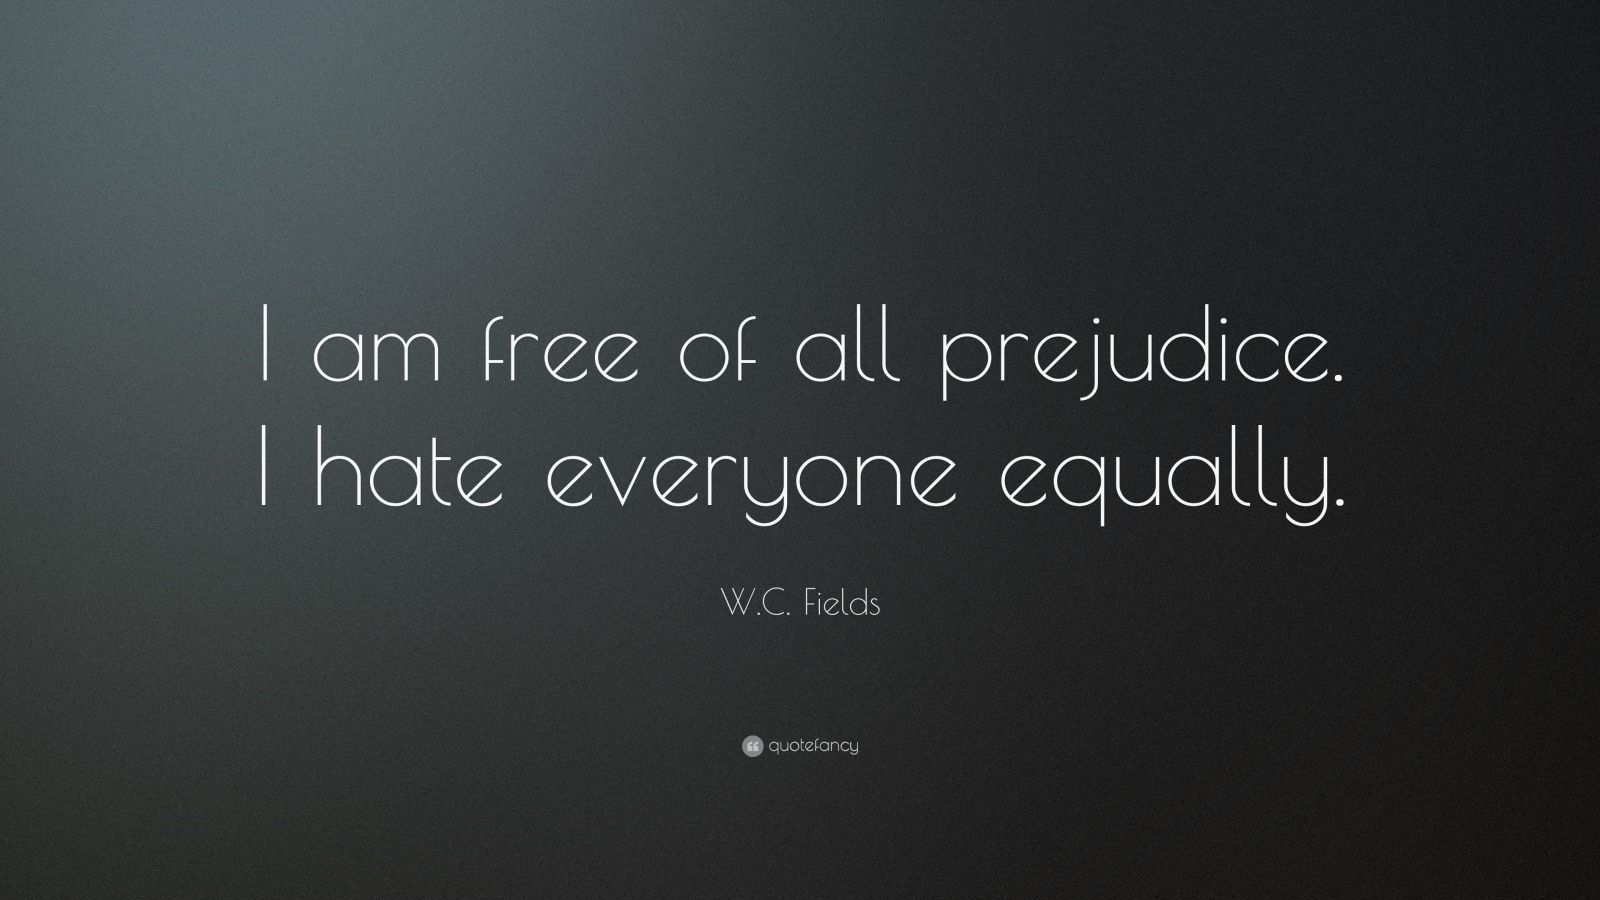 W. C. Fields Quote: “I am free of all prejudice. I hate everyone equally. ” (13 wallpaper)